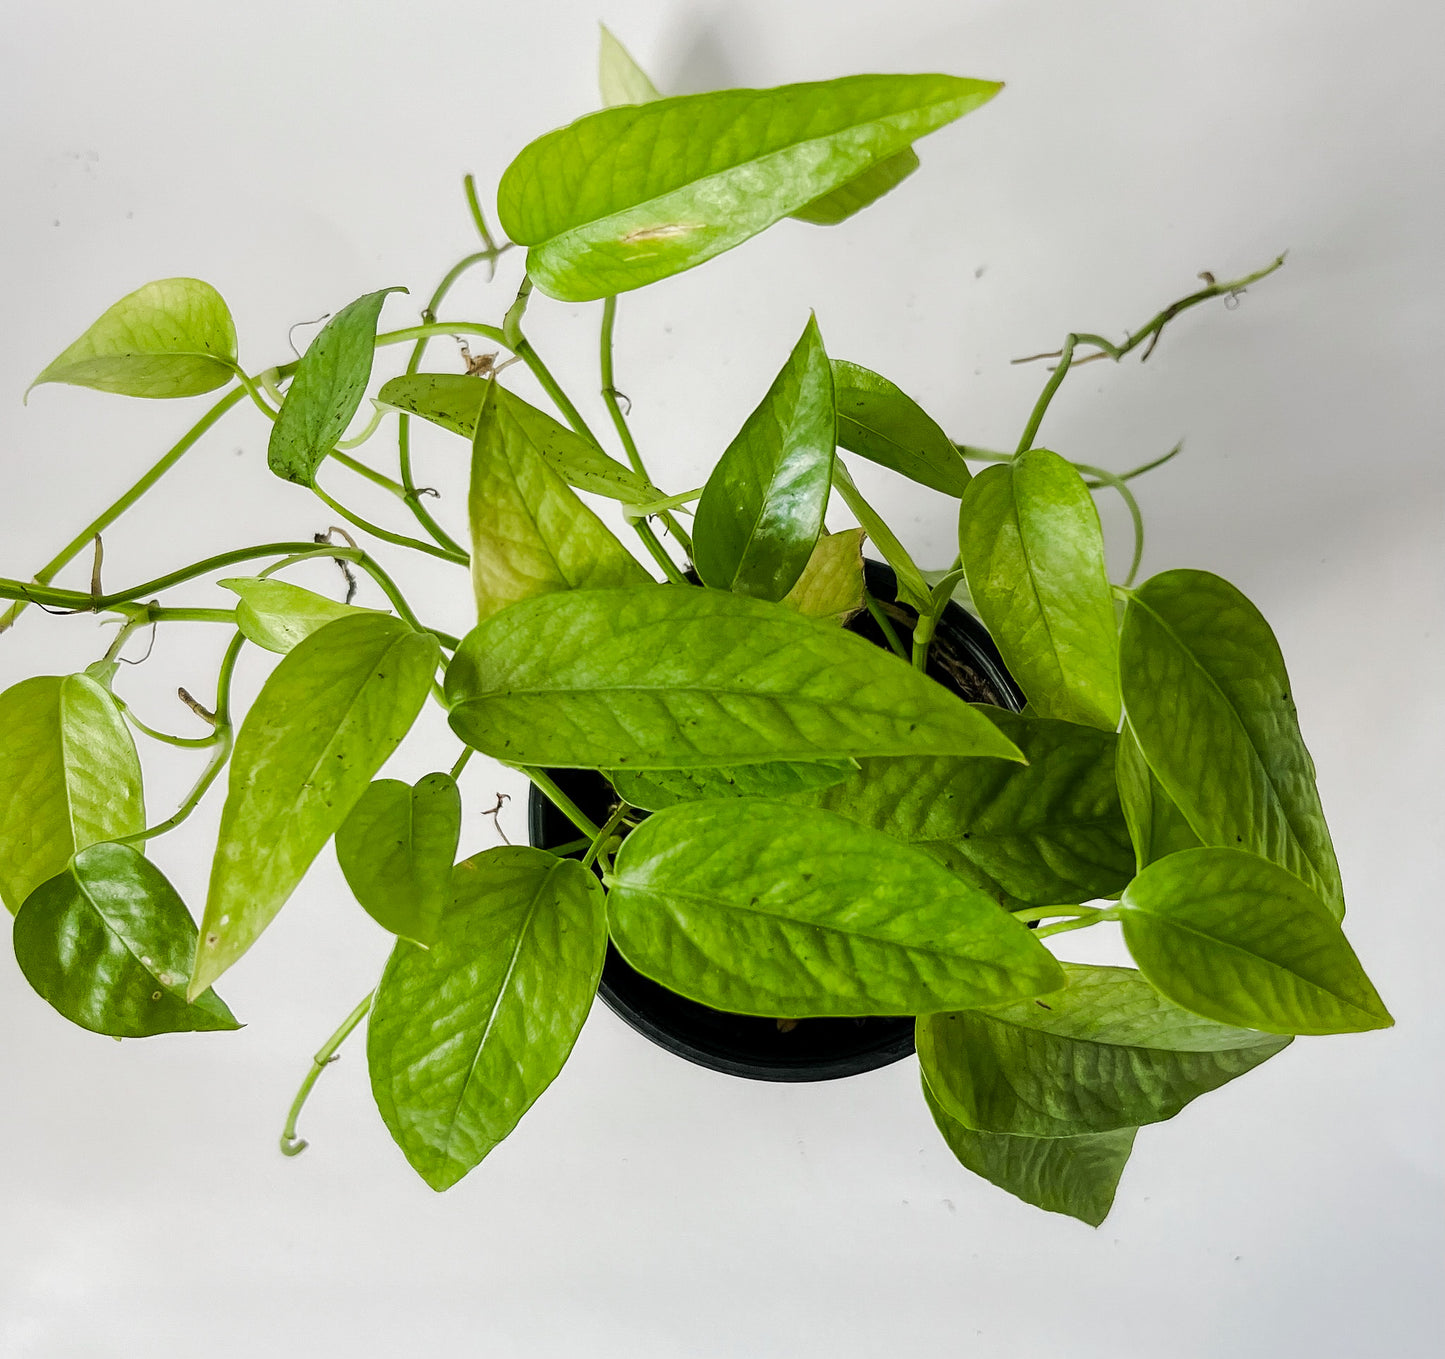 Epipremnum Pinnatum 'Cebu Blue' Pothos- Easy Care, Quick Growing, Beautiful Silvery Green Colored Leaves That Fenestrate - Tropical Houseplant (4" or  6" Pot)